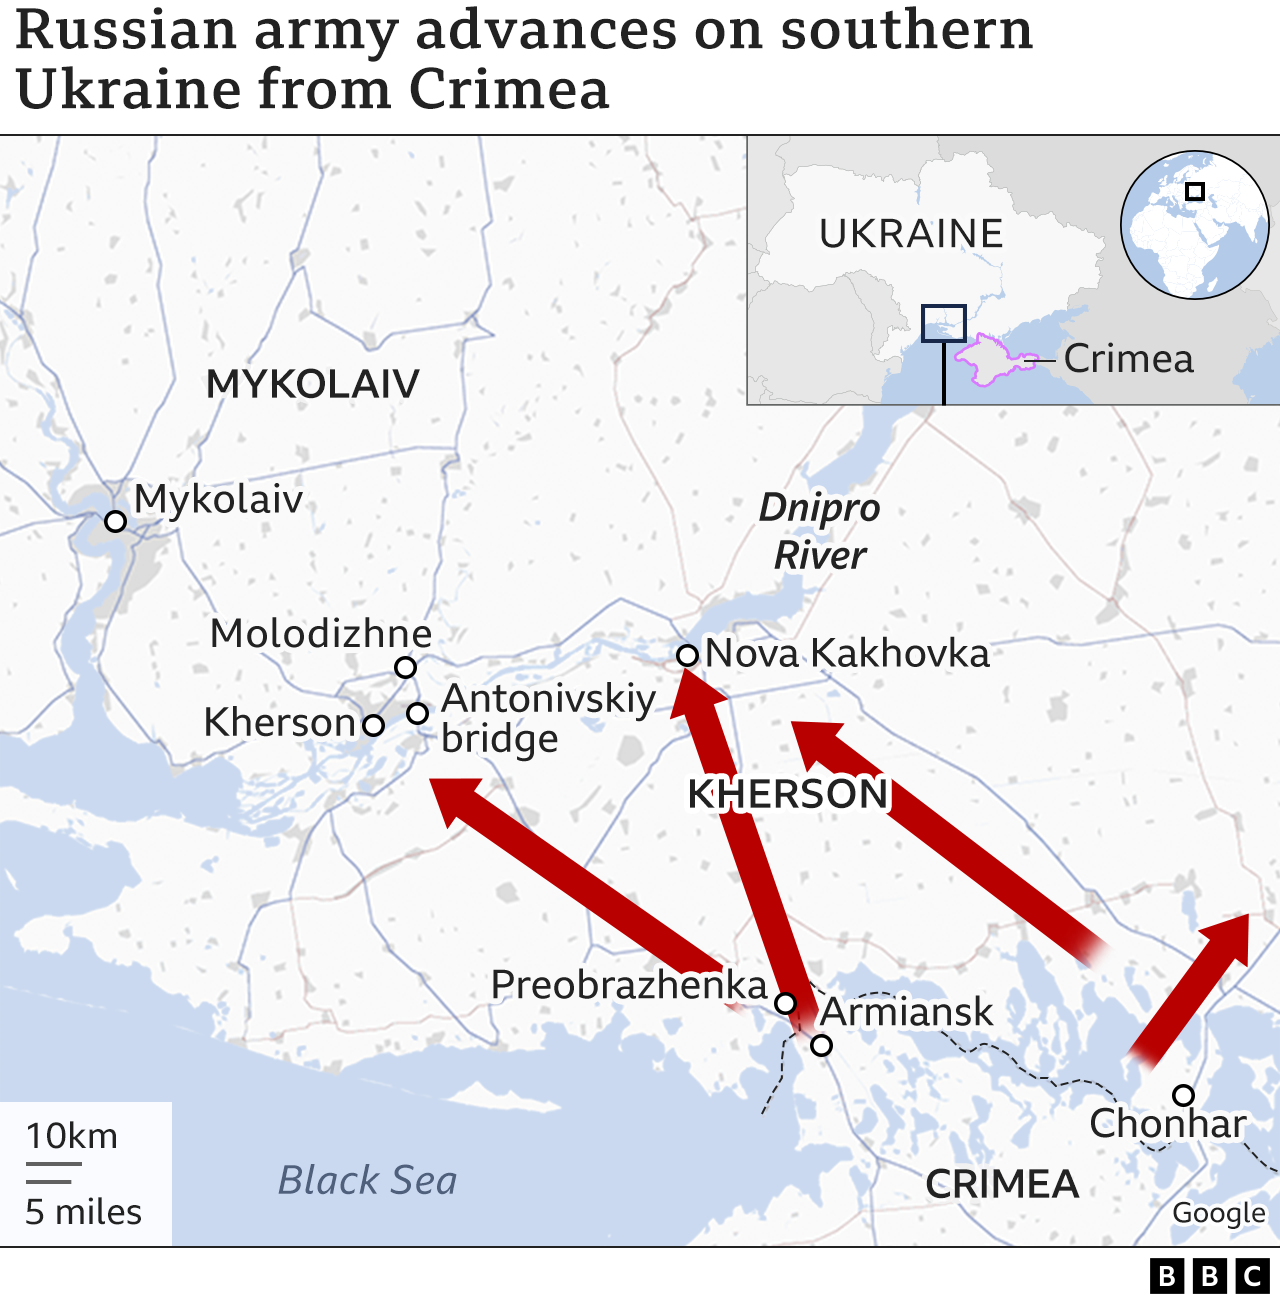 BBC map showing where Russian troops advanced from Crimea into southern Ukraine